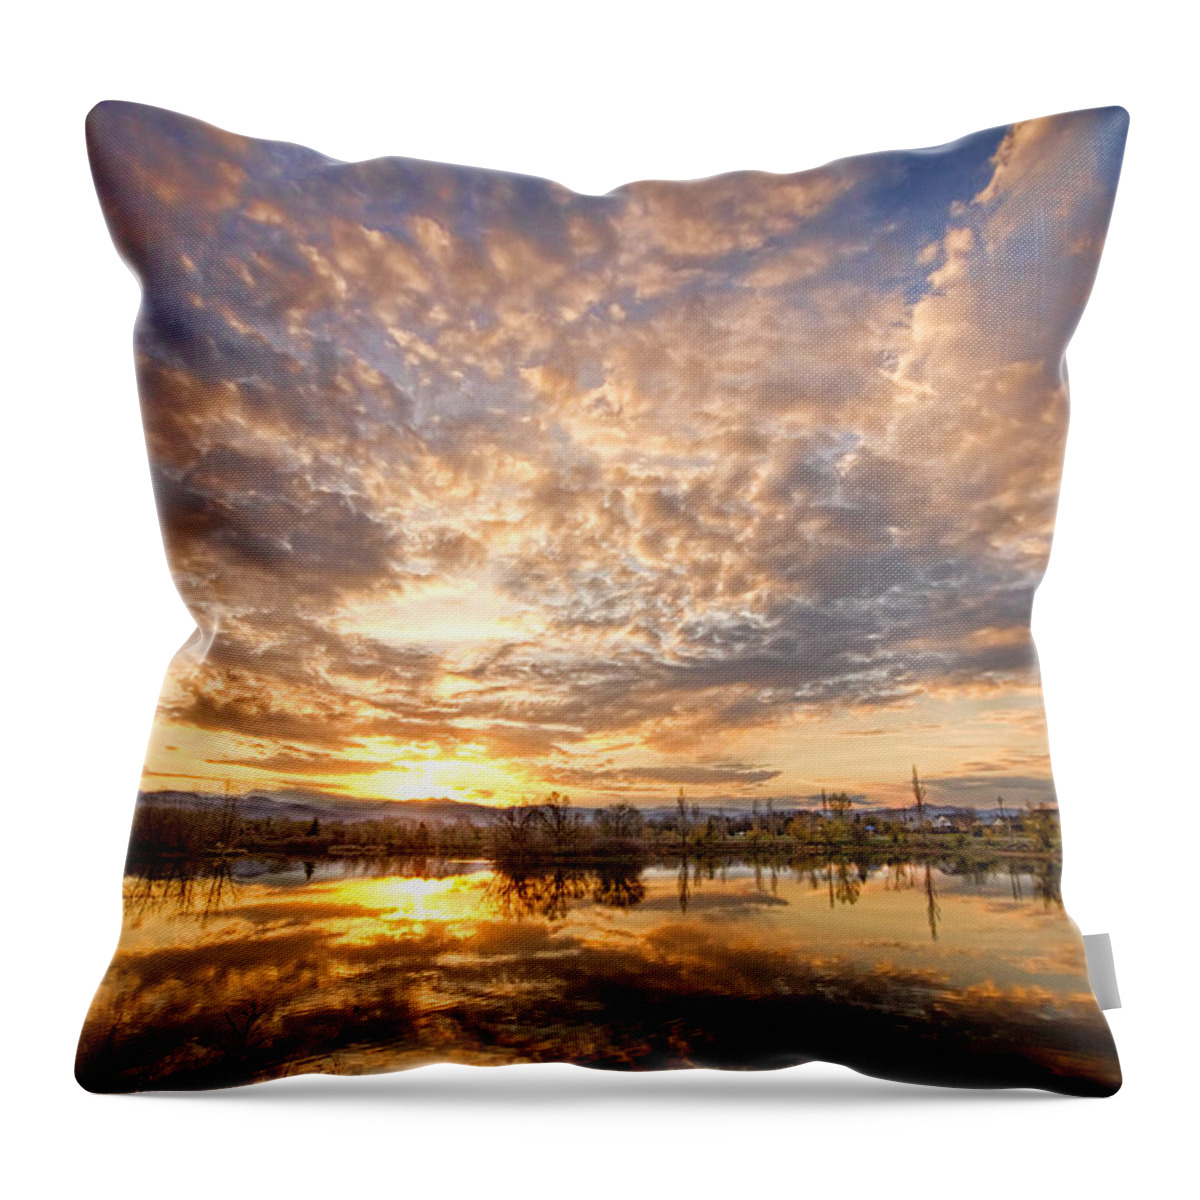 Clouds Throw Pillow featuring the photograph Golden Ponds Scenic Sunset Reflections 5 by James BO Insogna